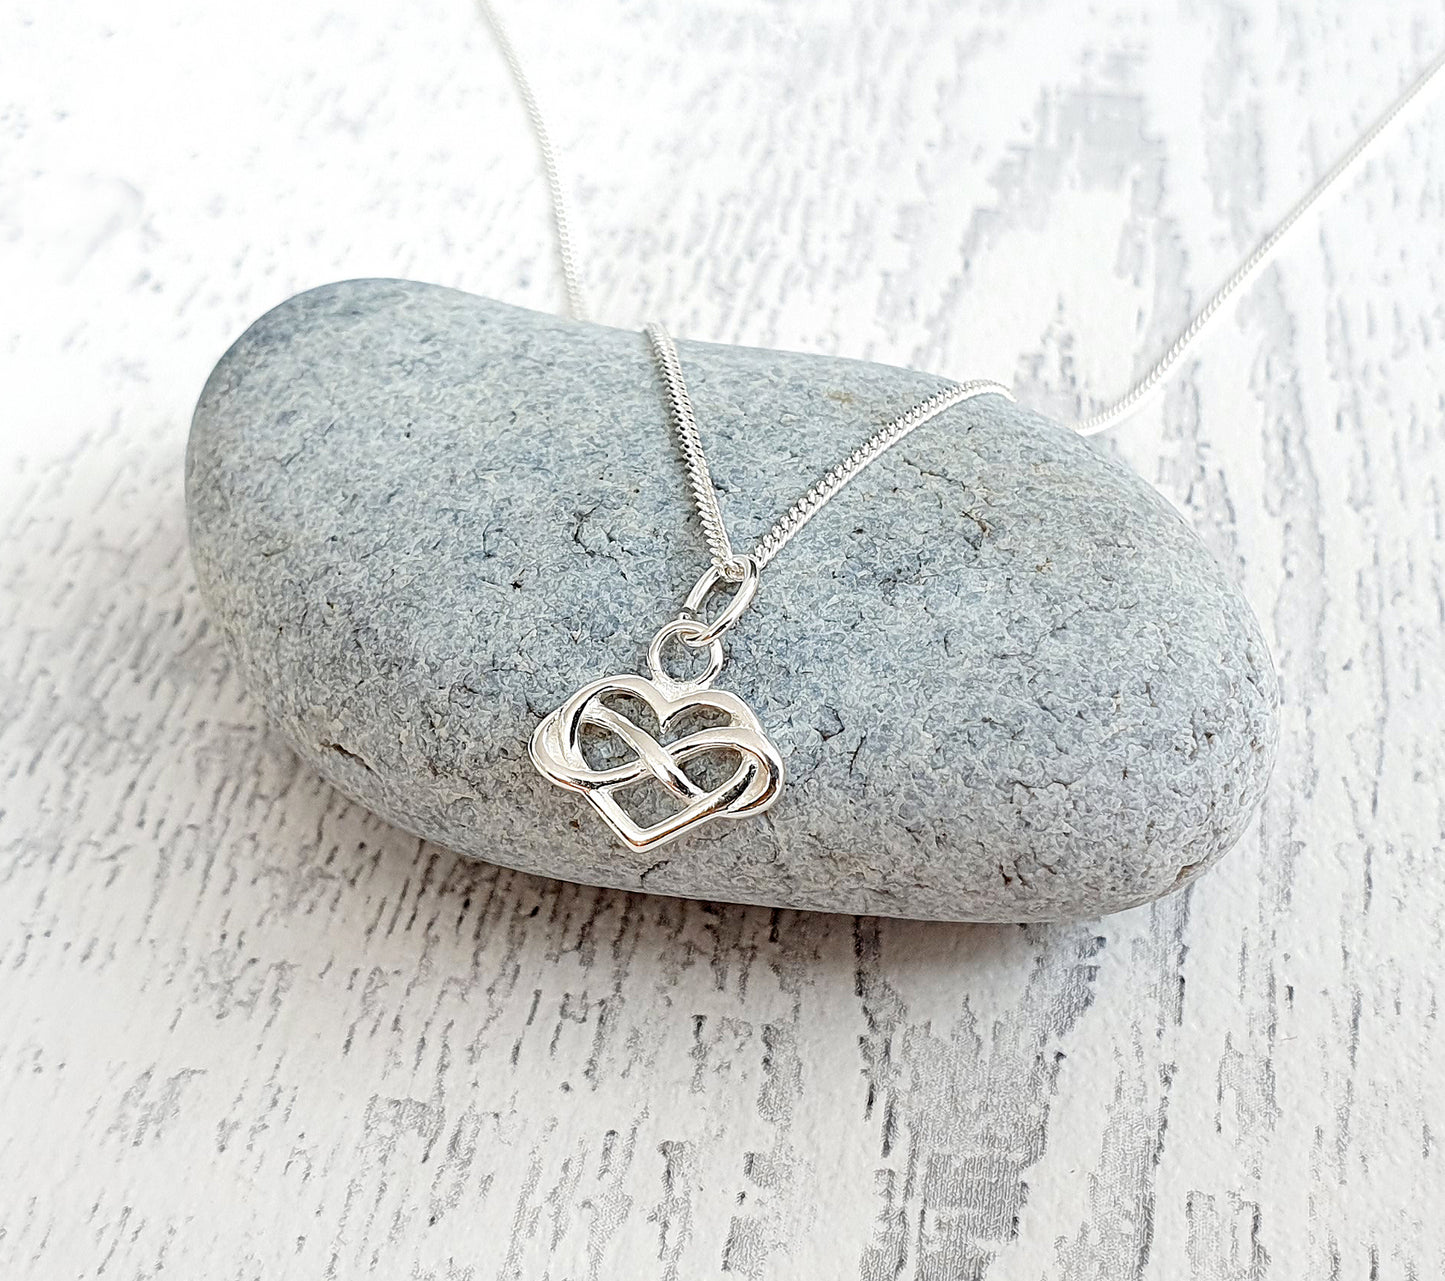 Best Friend Infinity Heart Necklace in Sterling Silver 925, Personalised Gift